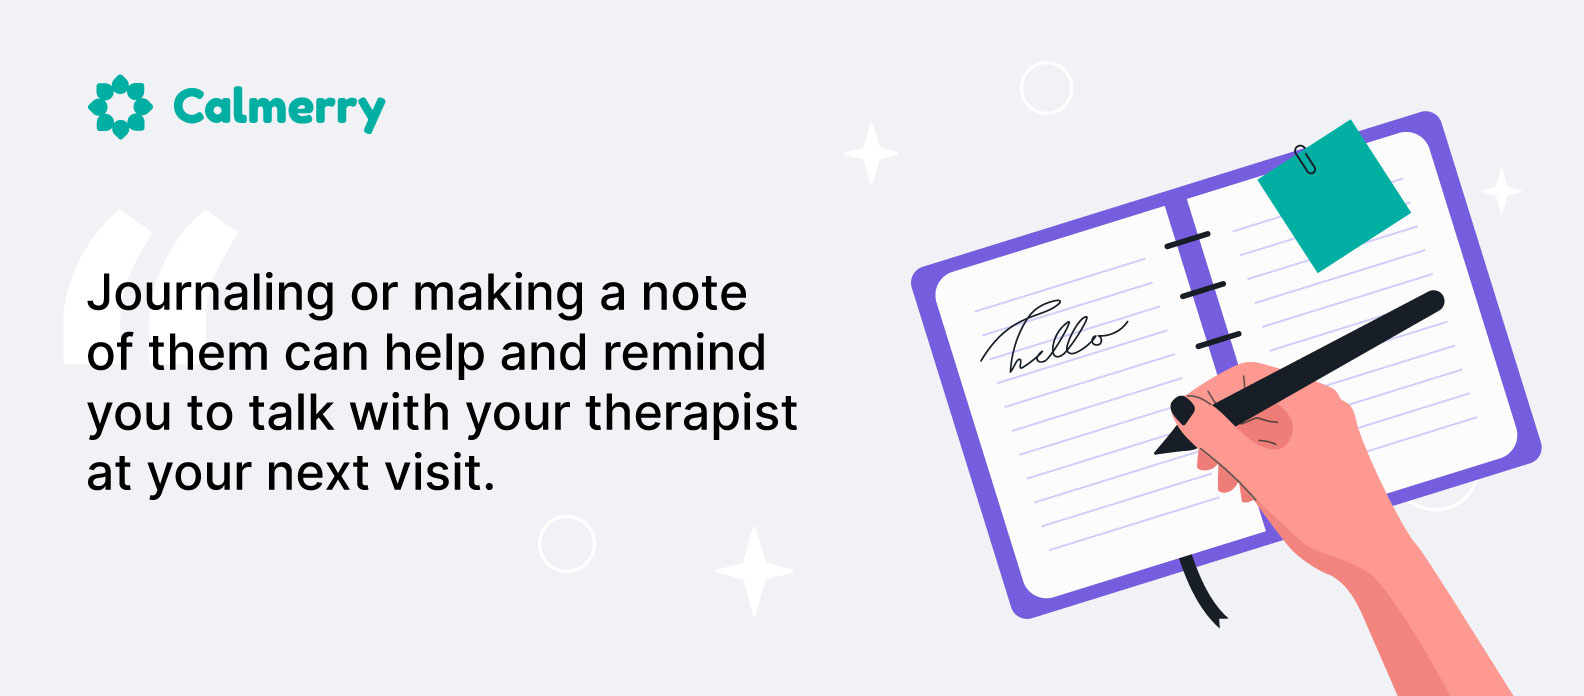 Journaling can help you remind of what you should talk with your therapist your next visit